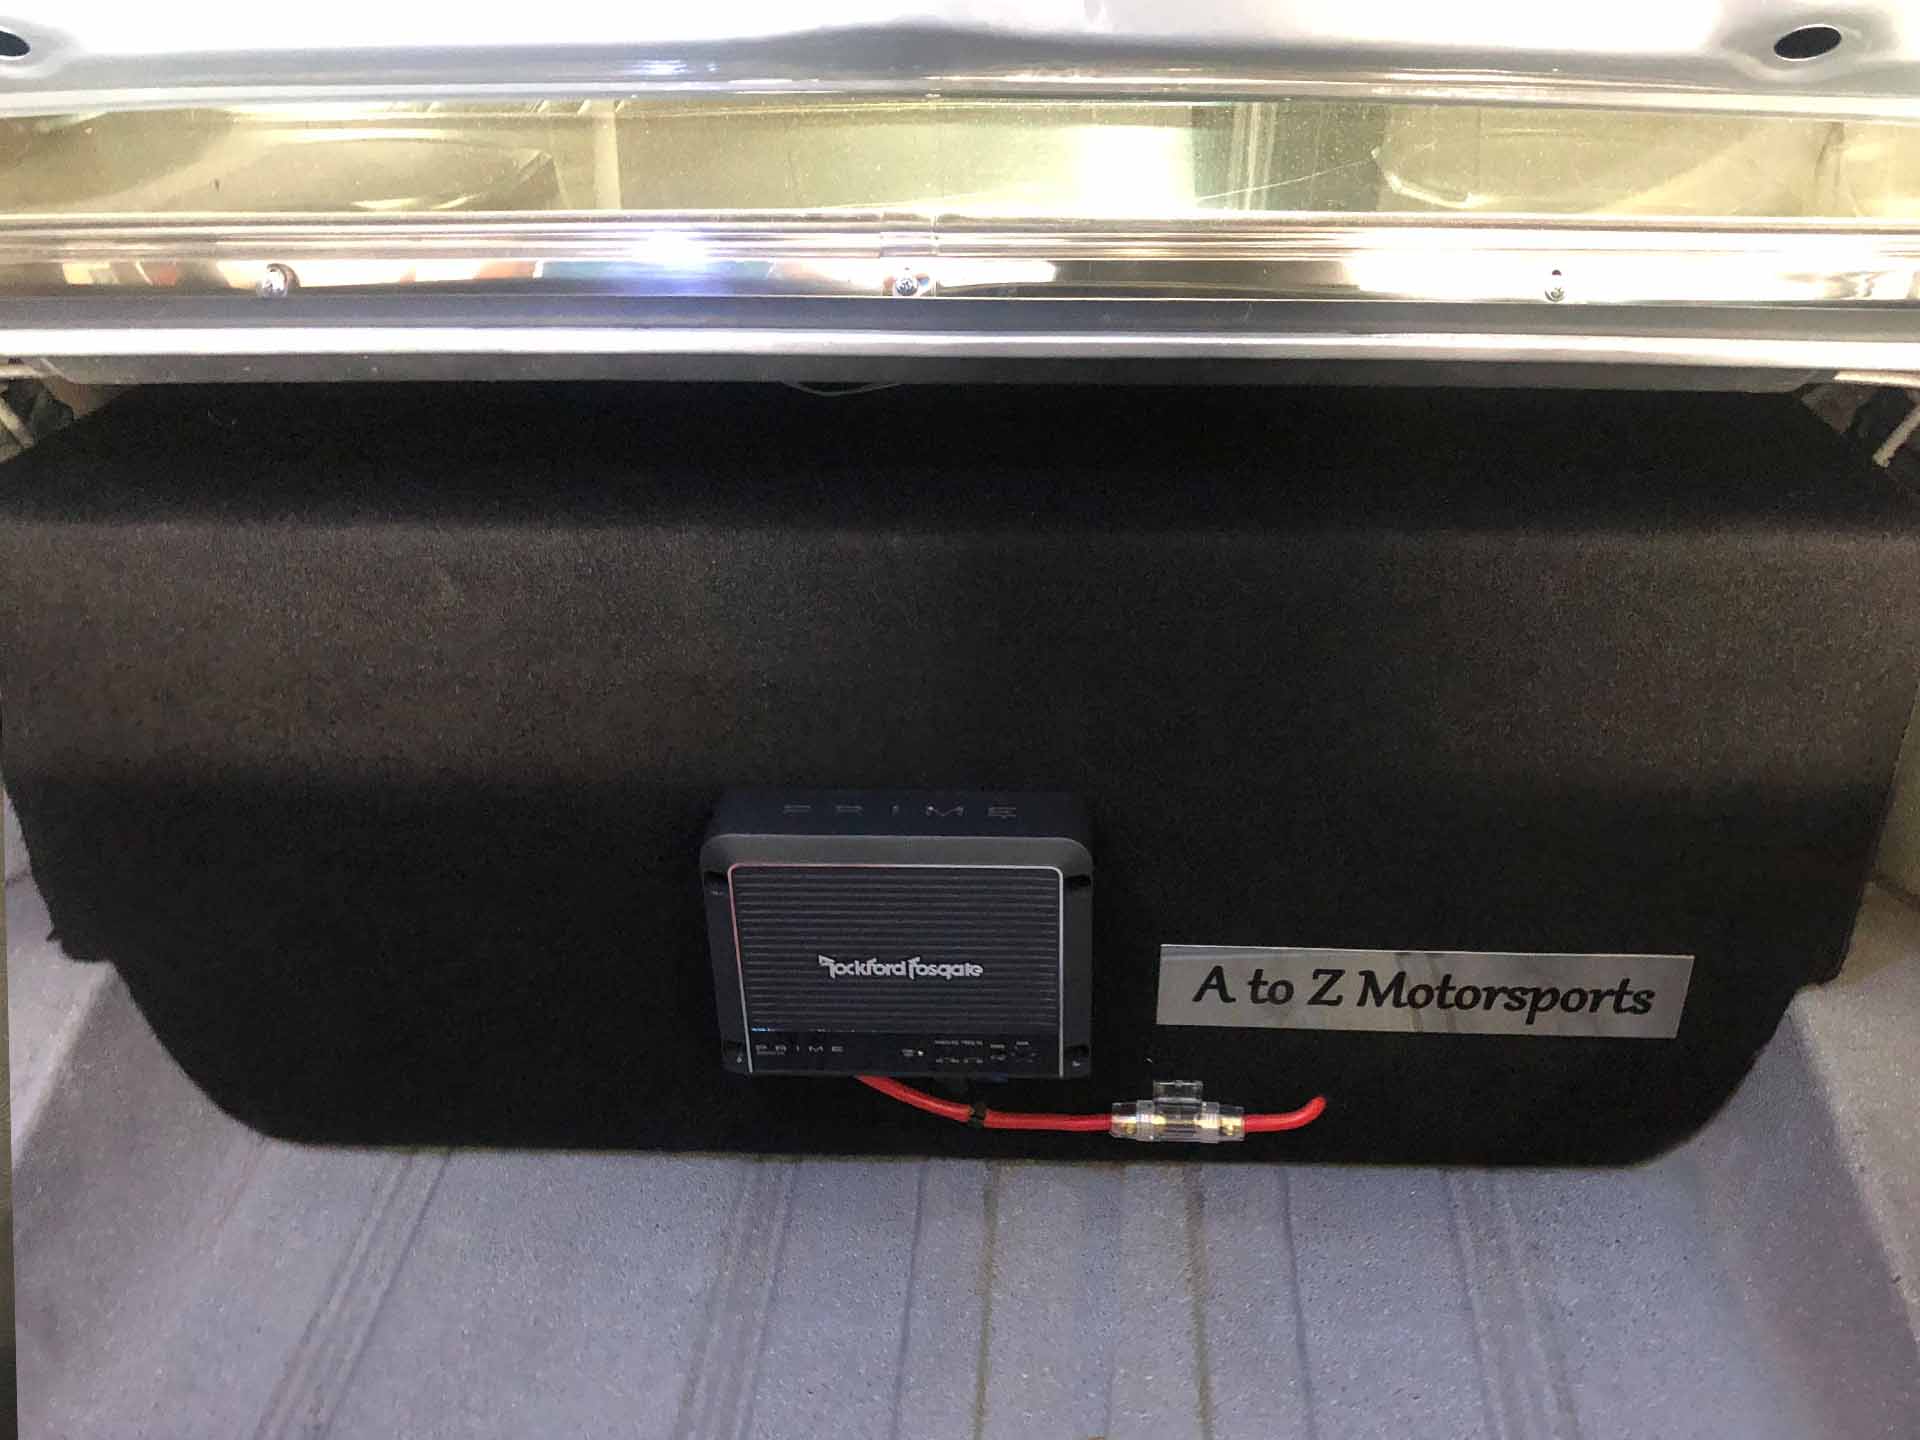 Chevy SS stereo box installed